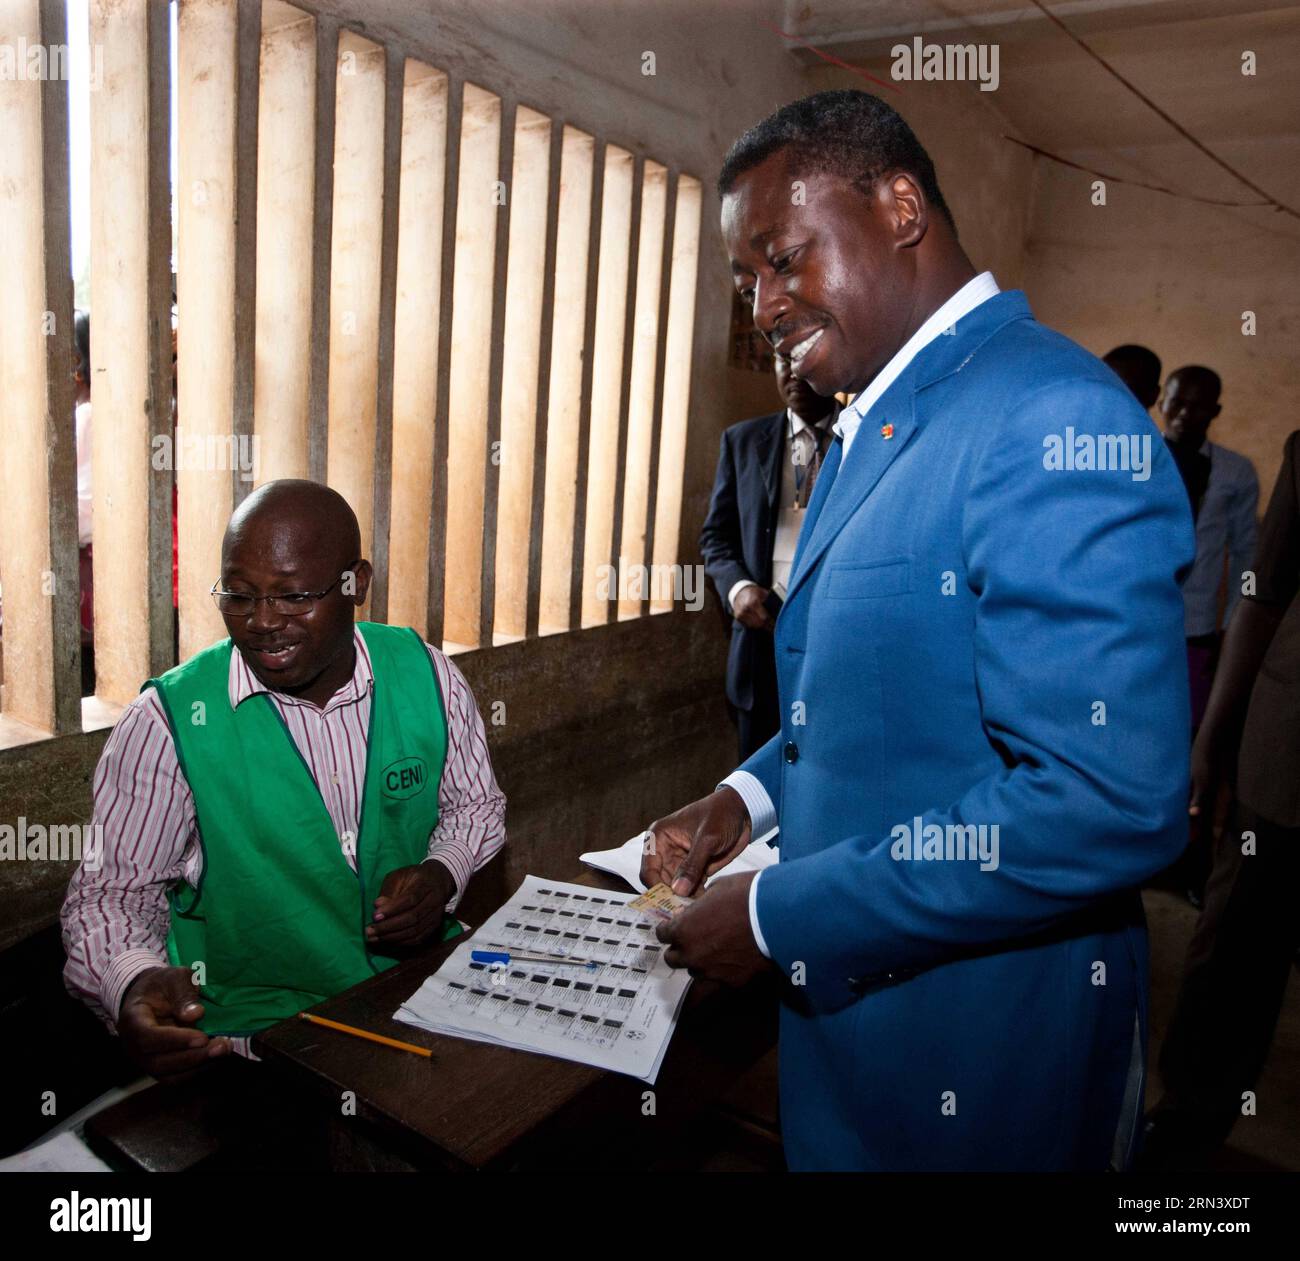 (150428) -- LOME, April 28, 2015 -- Photo taken on April 25, 2015 shows the incumbent president of Togo Faure Essozimna Gnassingbe casting his ballot at a station during the presidential election in Lome, capital of Togo. Faure Essozimna Gnassingbe won the country s presidential election in the votes held on Saturday, according to preliminary results on Tuesday. ) TOGO-LOME-PRESIDENTIAL ELECTION-FAURE-VICTORY LixJing PUBLICATIONxNOTxINxCHN   Lome April 28 2015 Photo Taken ON April 25 2015 Shows The incumbent President of Togo Faure Essozimna Gnassingbe Casting His Ballot AT a Station during Th Stock Photo